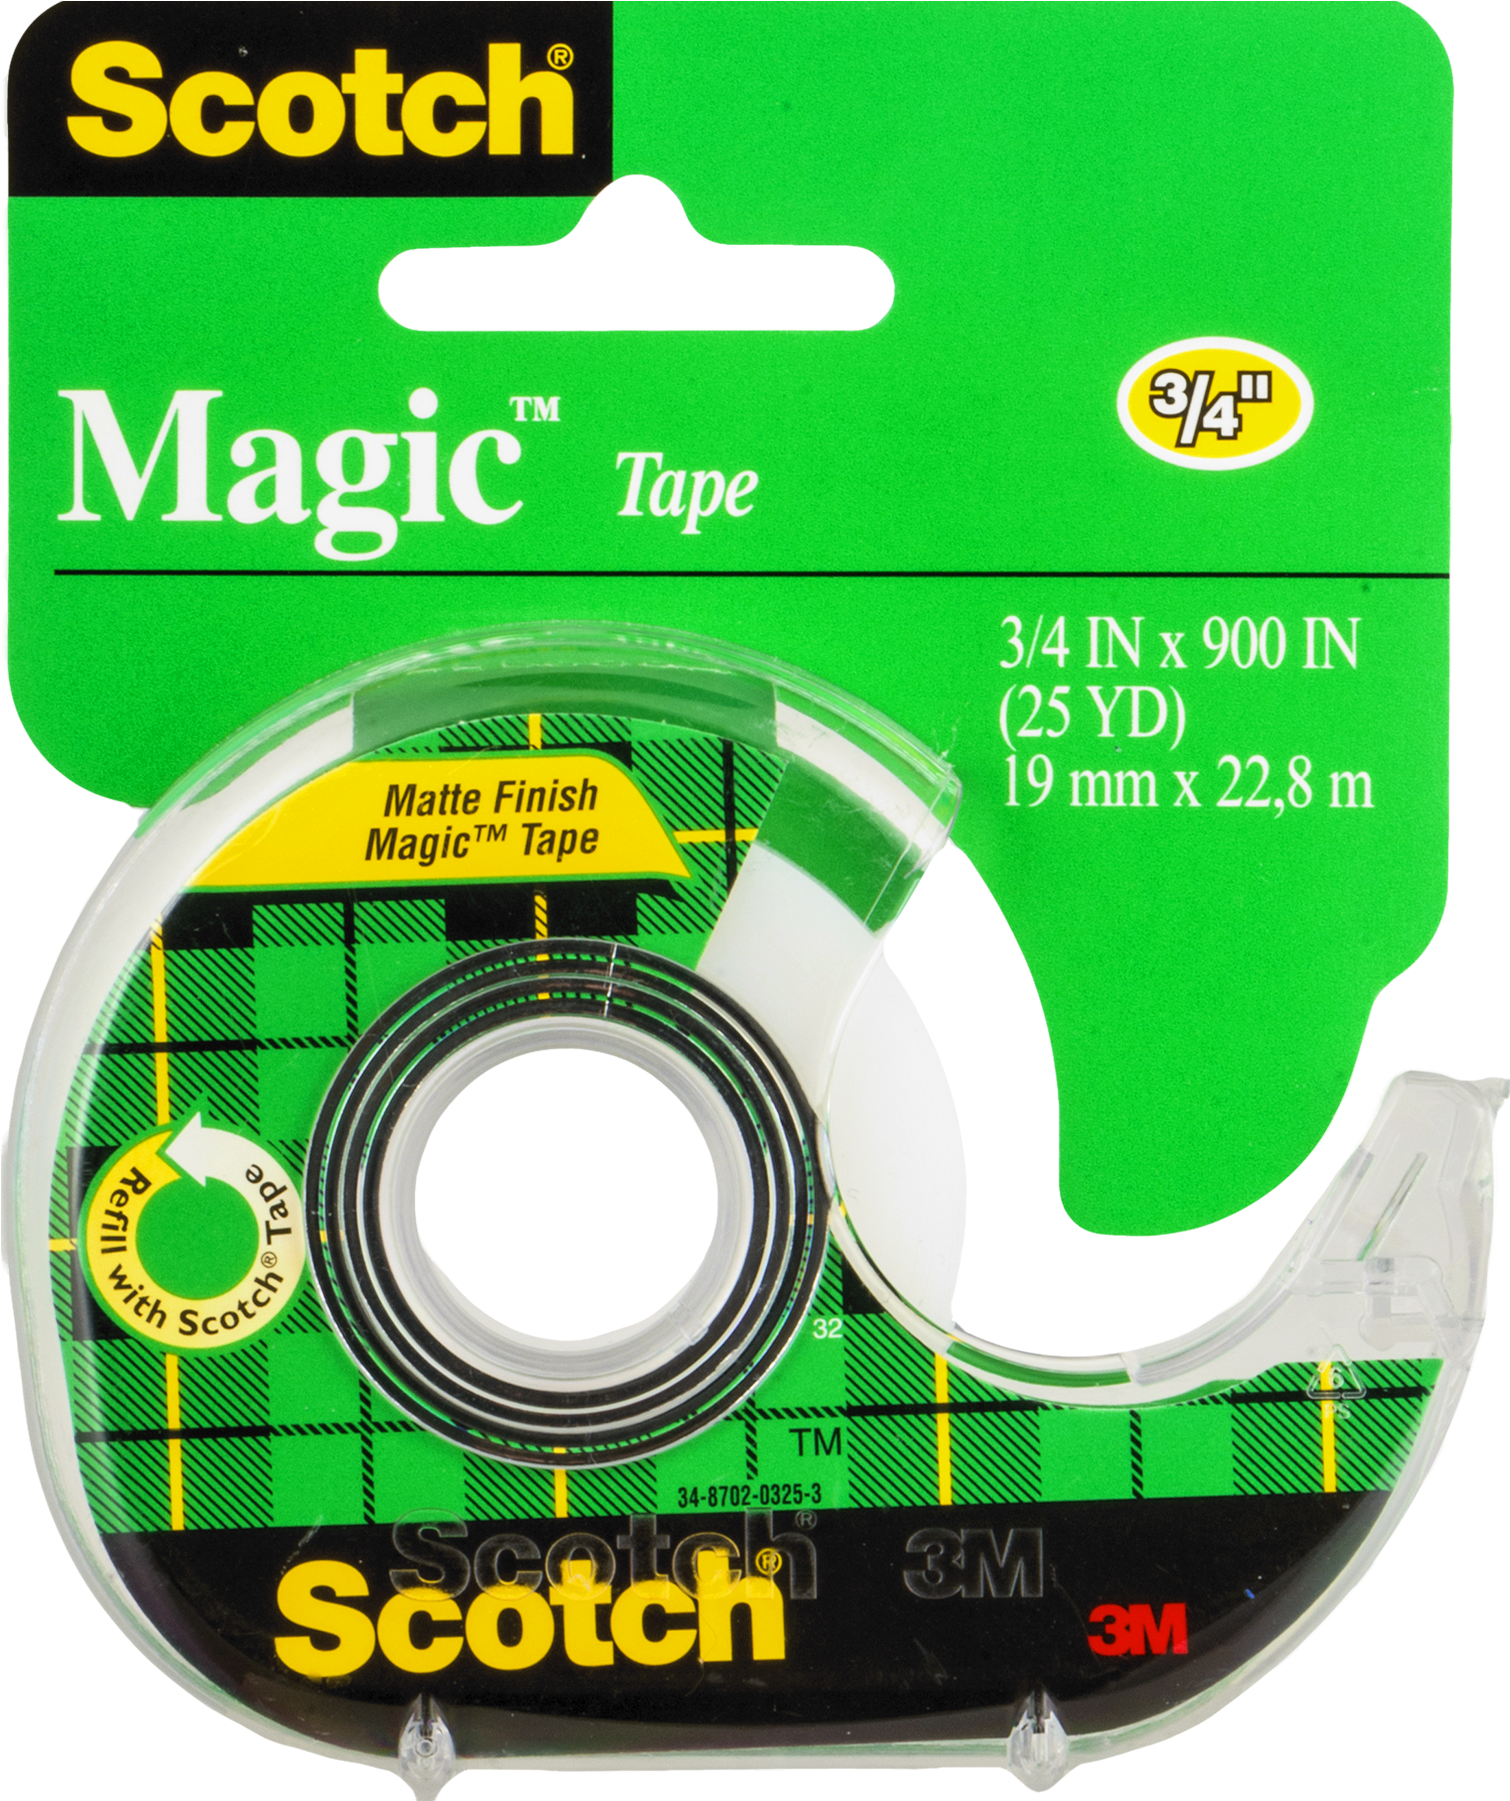 Scotch Magic Tape Packaging PNG image